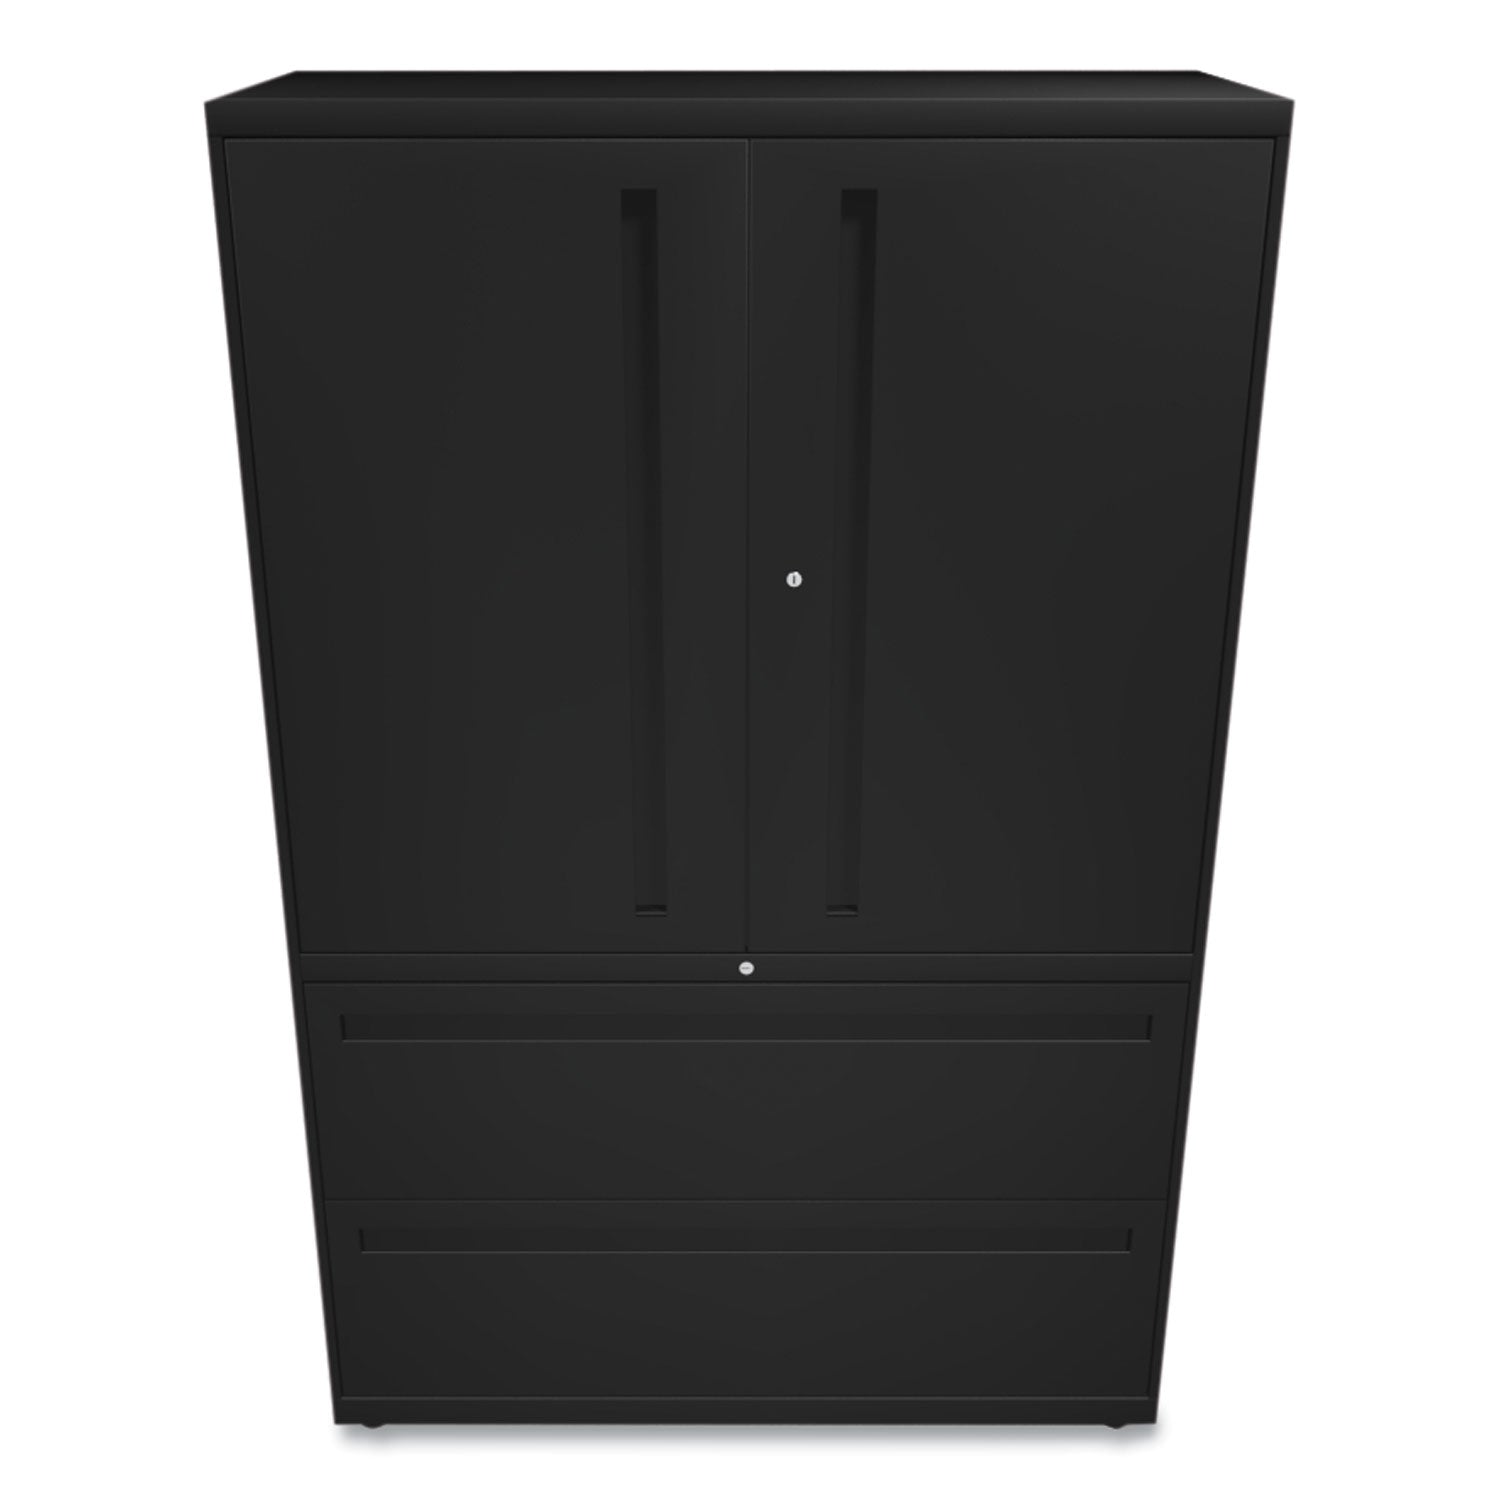 Brigade 700 Series Lateral File, Three-Shelf Enclosed Storage, 2 Legal/Letter-Size File Drawers, Black, 42" x 18" x 64.25 - 